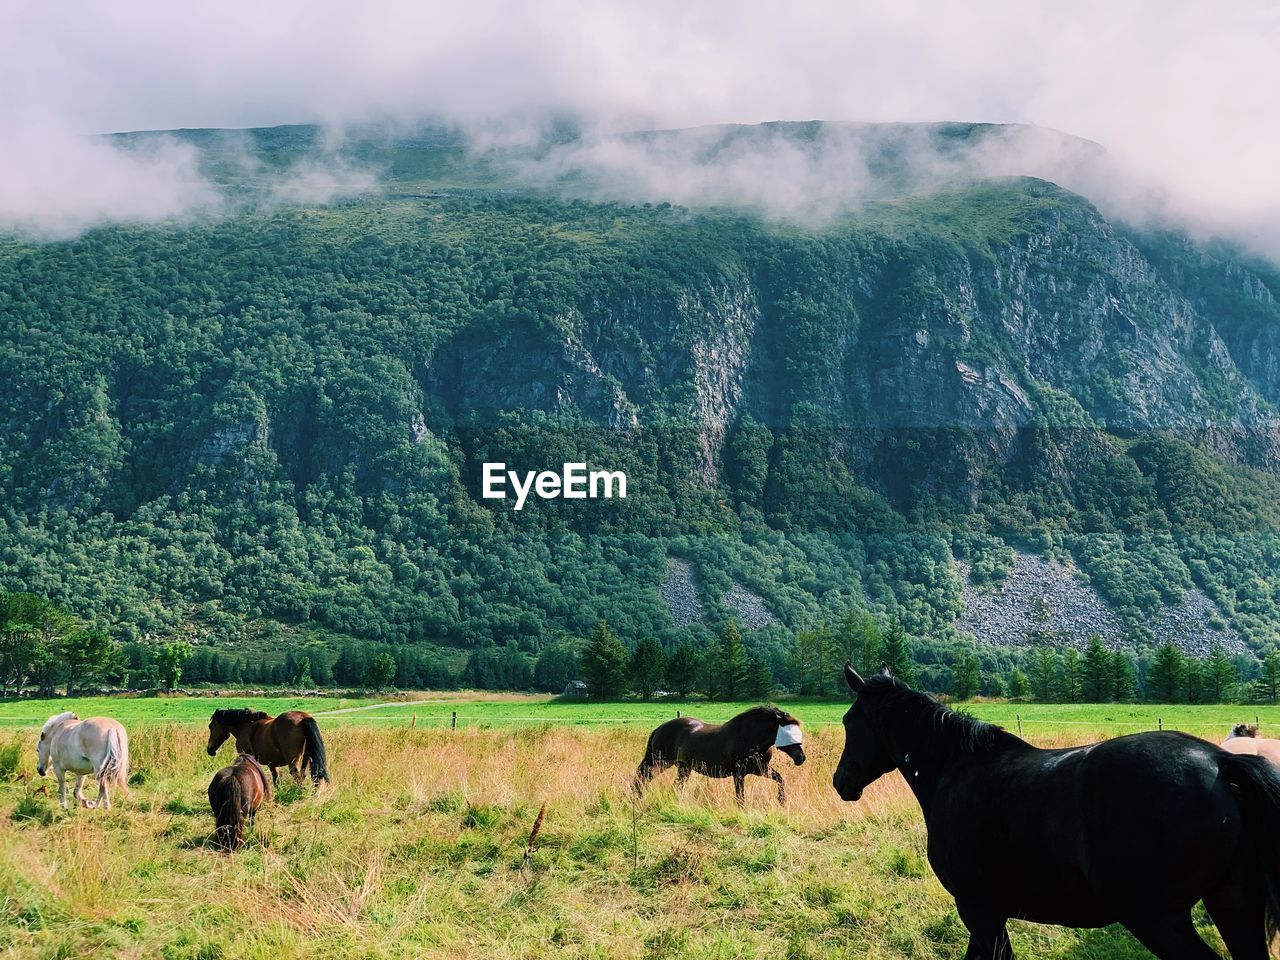 Horses in front of a mountain with fog,  sunlight on a wild landscape